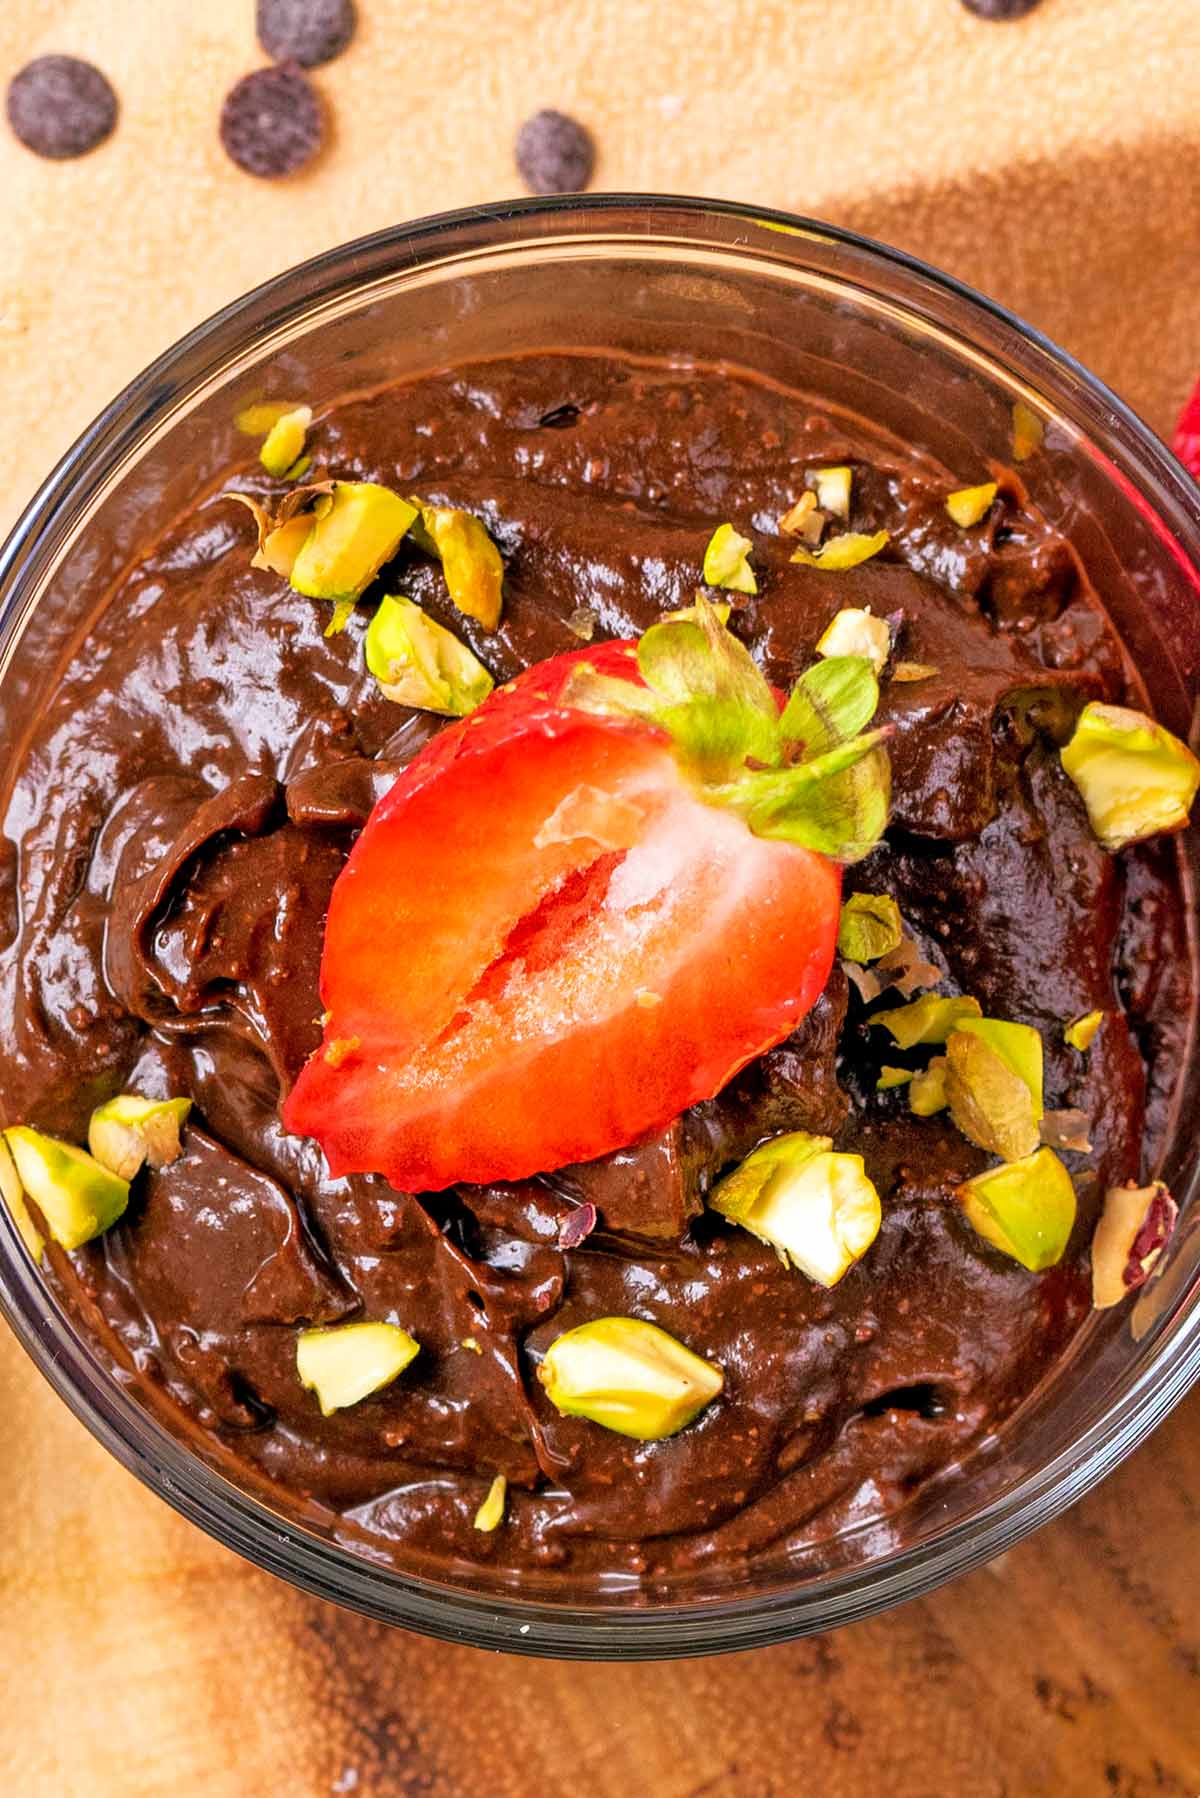 Chocolate pudding topped with chopped nuts and a strawberry half.